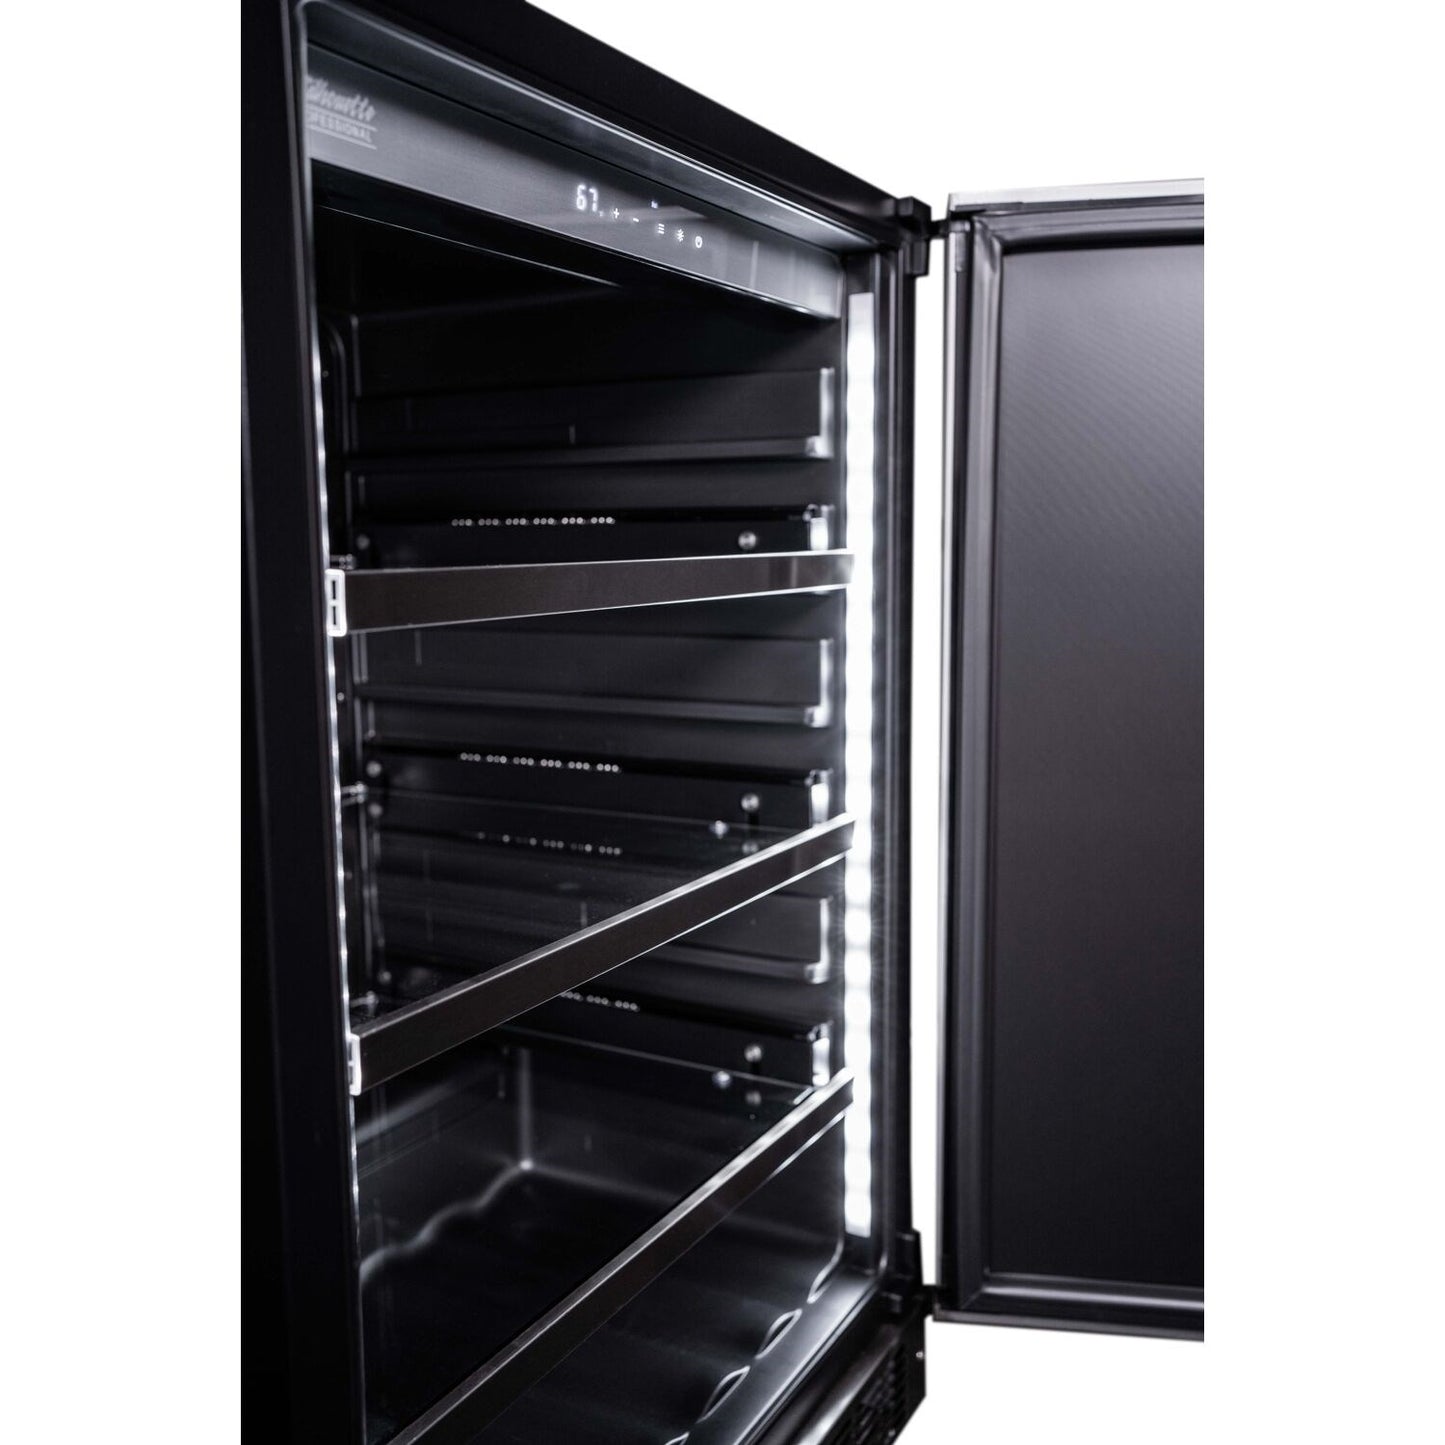 Danby Silhouette "Niagara" 24" Wide, Integrated All Refrigerator, Energy Star Rated- Holds 126 Cans